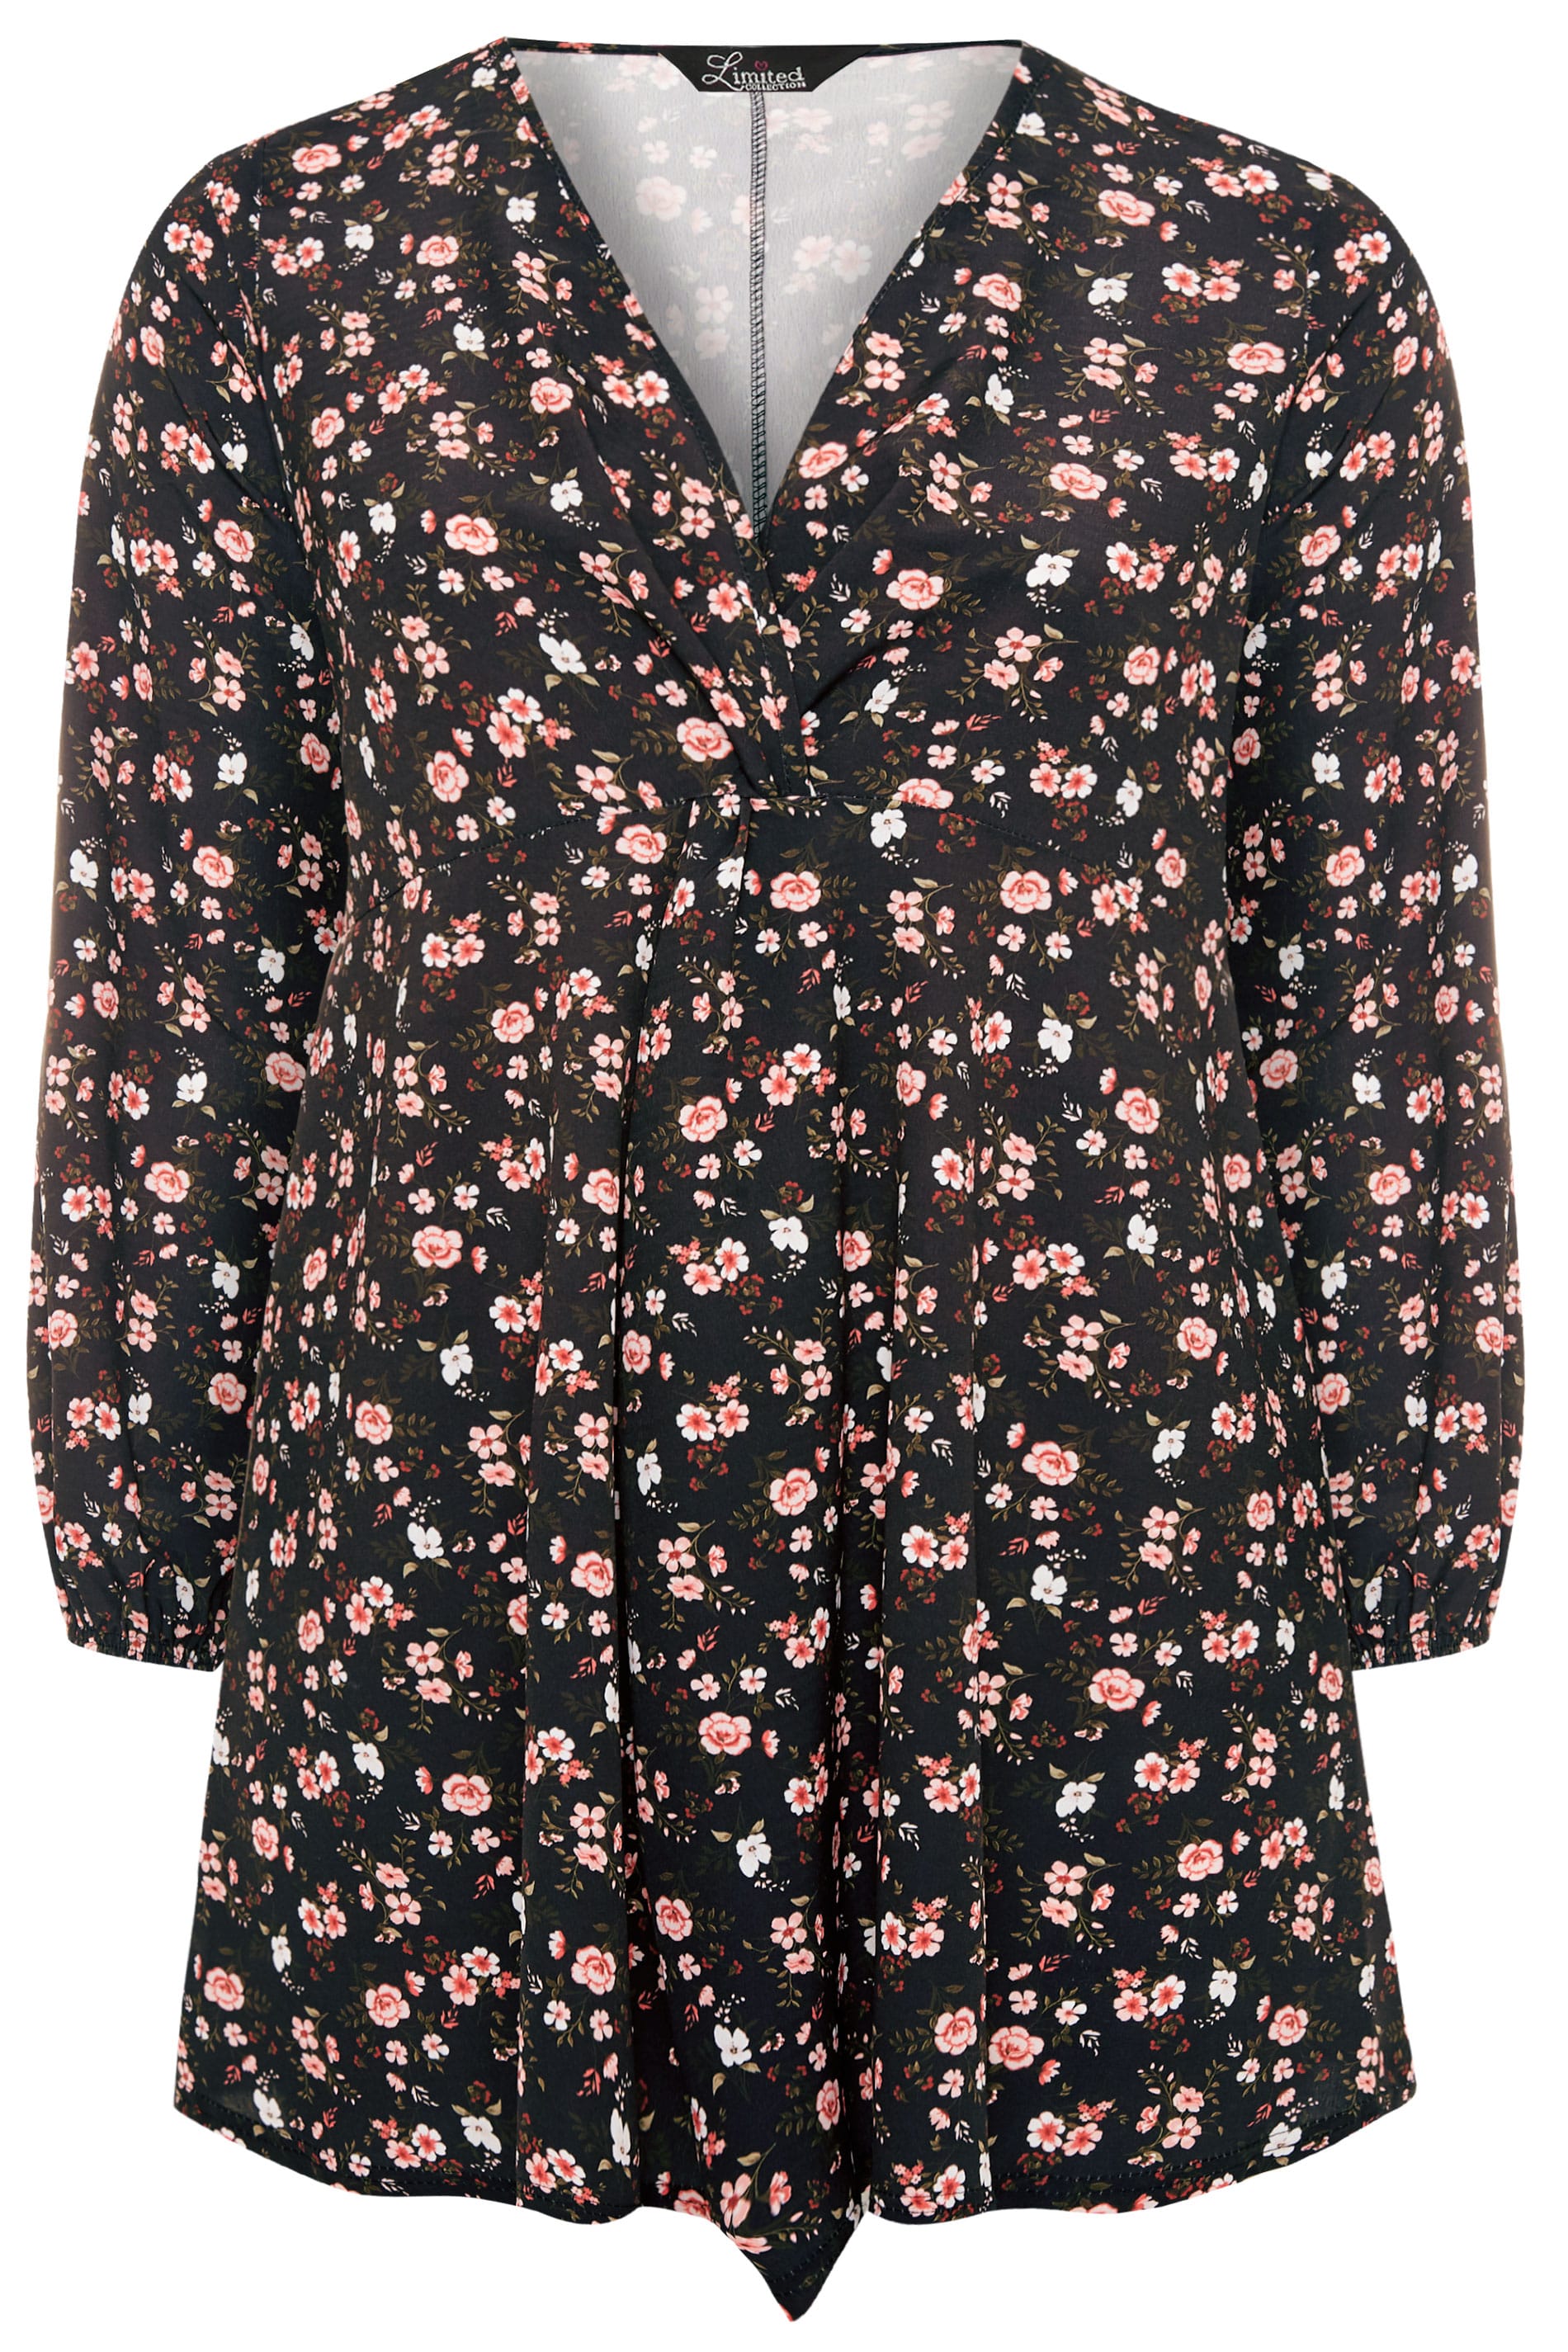 LIMITED COLLECTION Black Blossom Floral Knot Front Dress | Yours Clothing